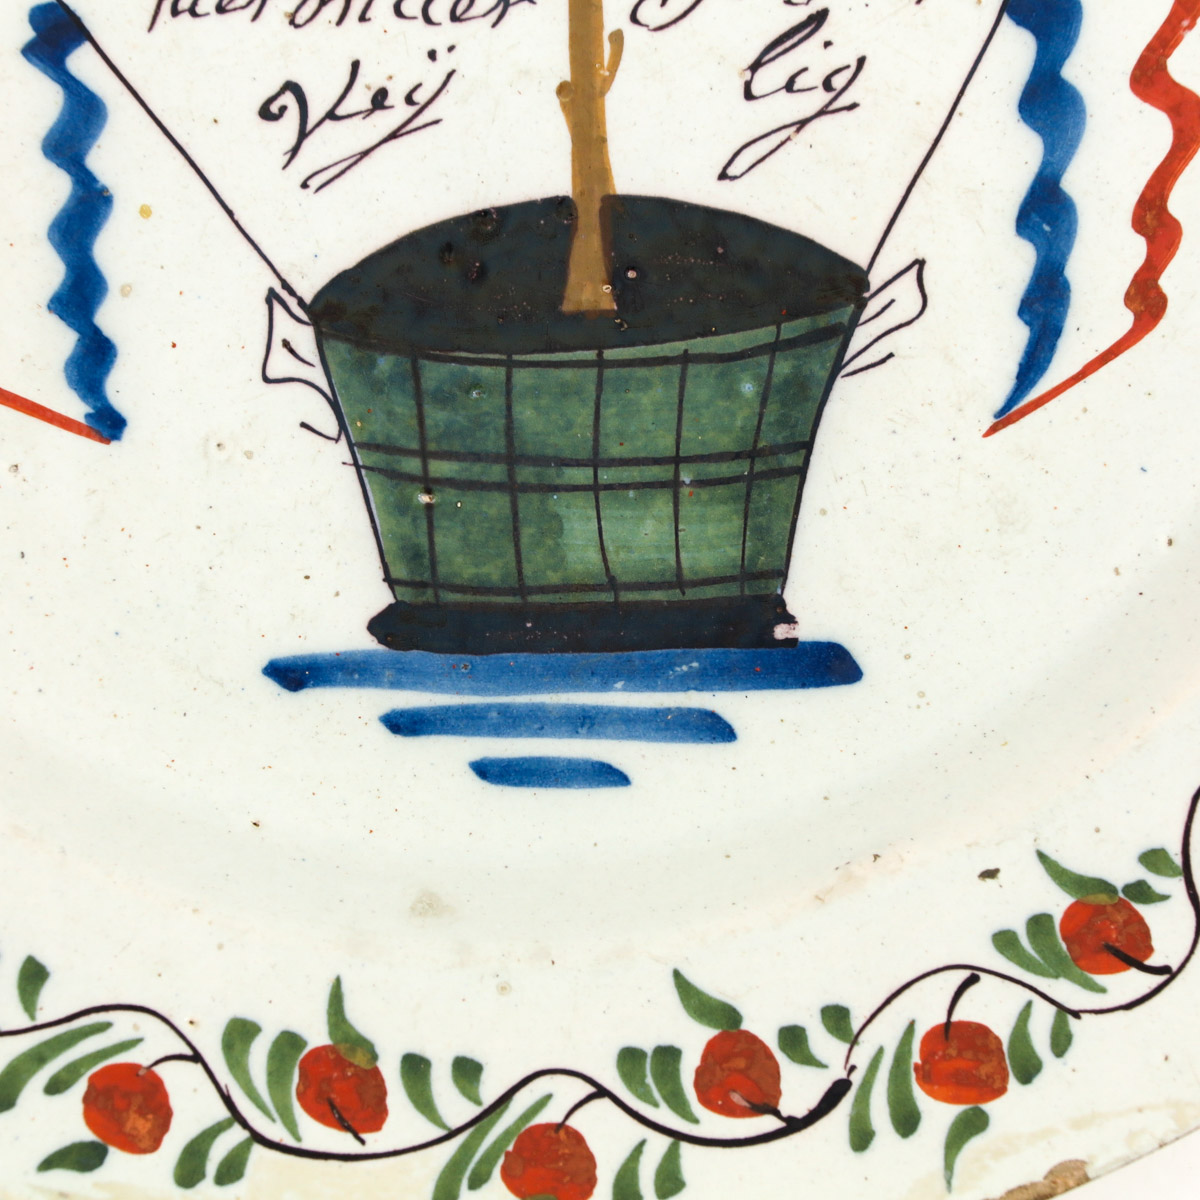 A Dutch Plate Depicting Apples and Oranges - Image 4 of 4